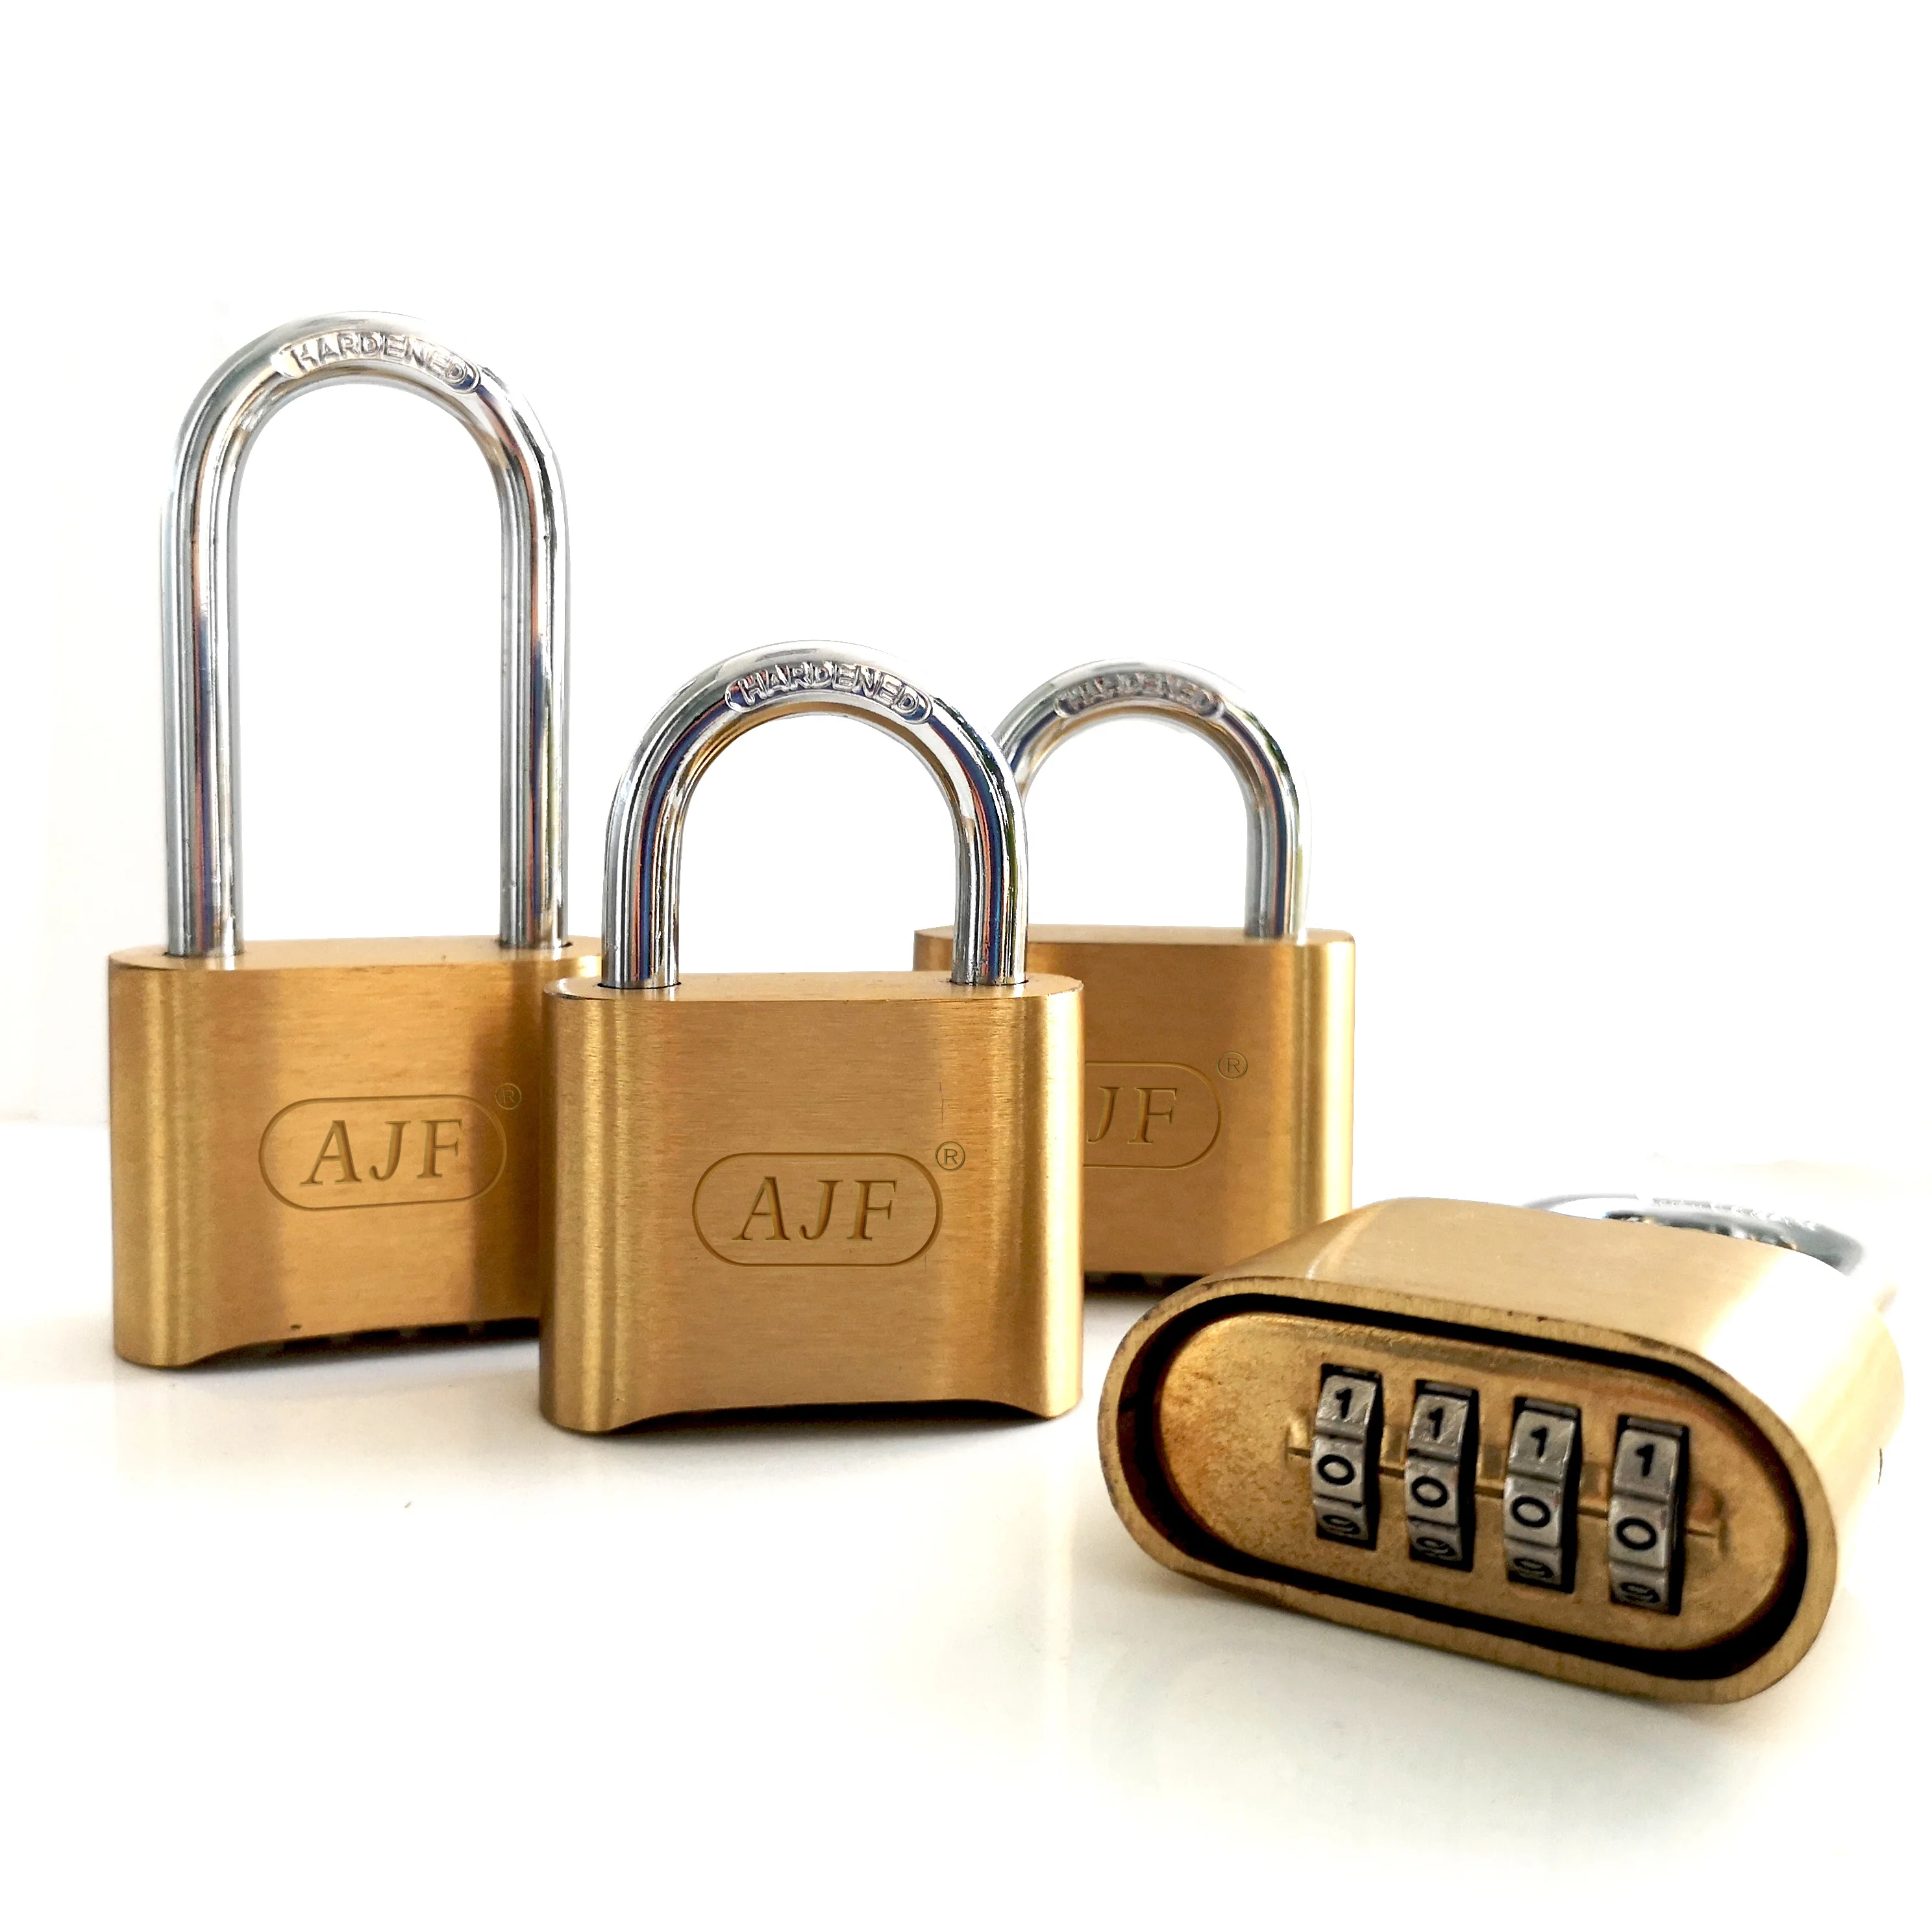 AJF High quality and security digital solid brass guard or locker or outdoor number combination padlock (60270916913)